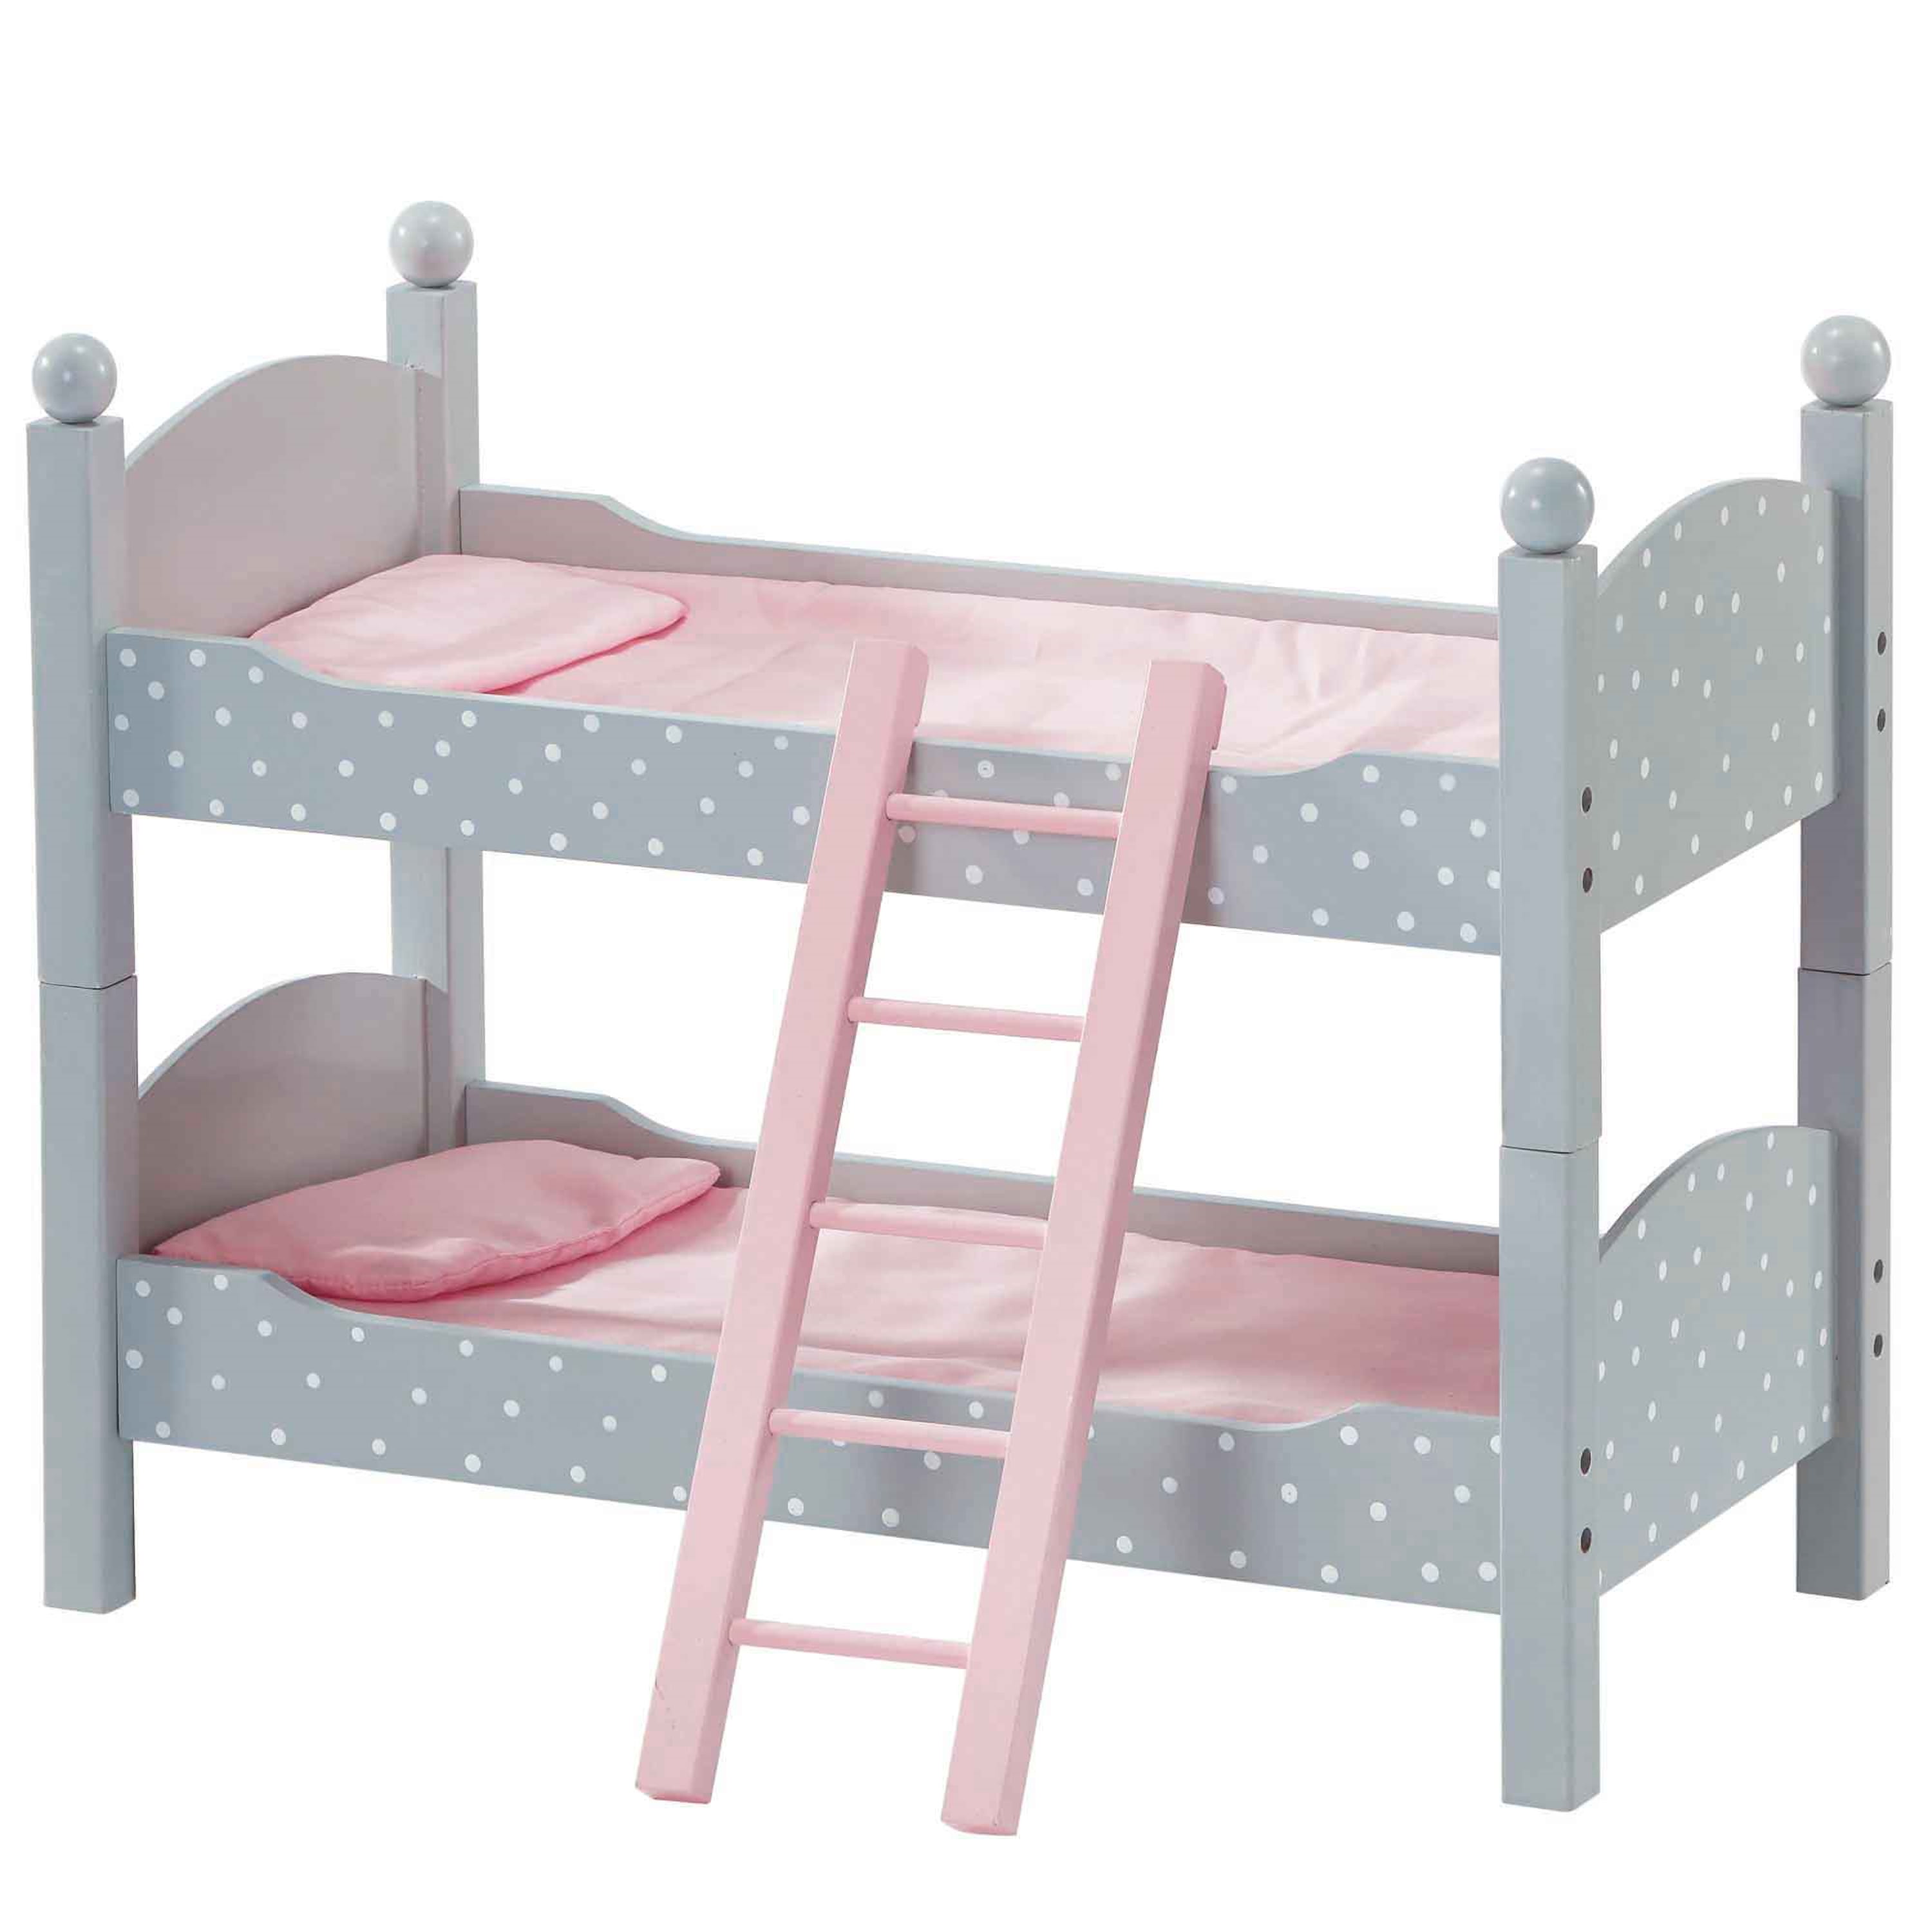 Emily Rose 18 Inch Doll Bed Com, Emily Rose Triple Bunk Bed